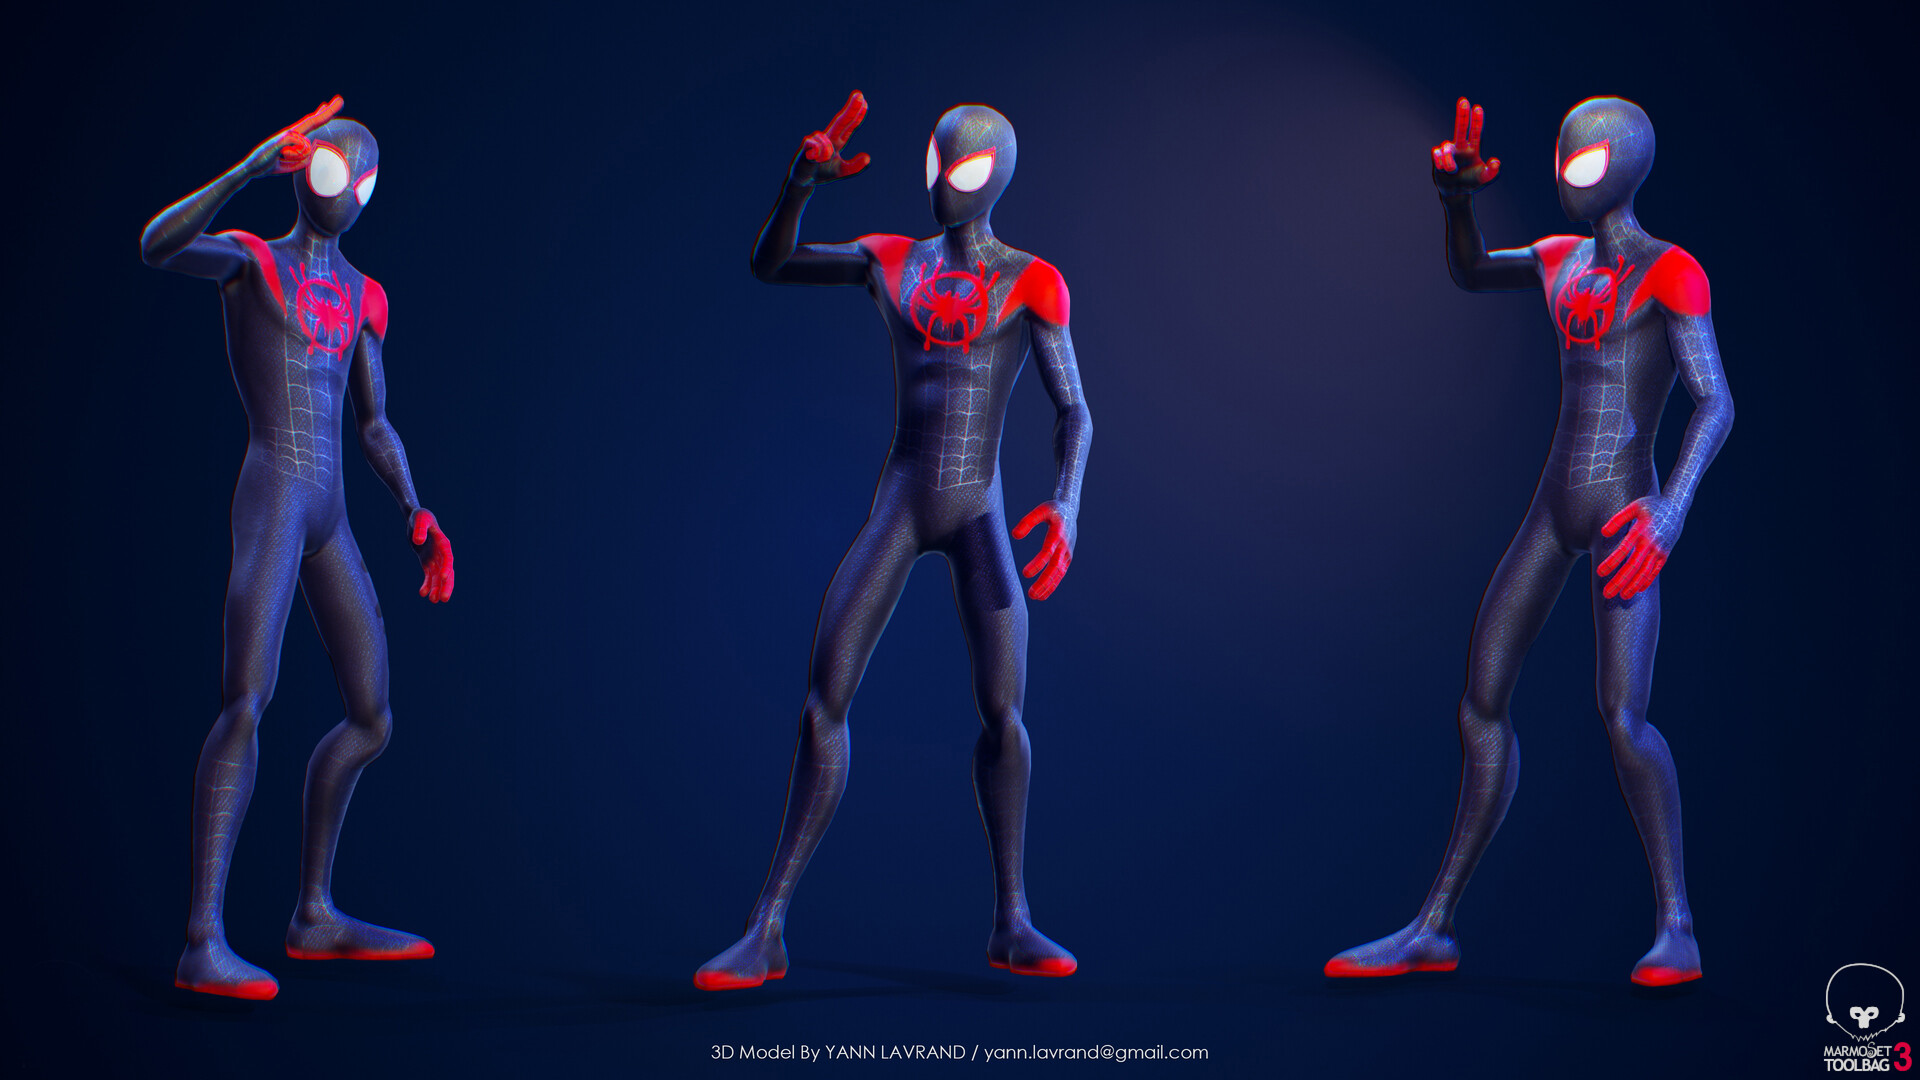 Yann Lavrand - Only One Spiderman - Into The Spider-Verse Fan Art